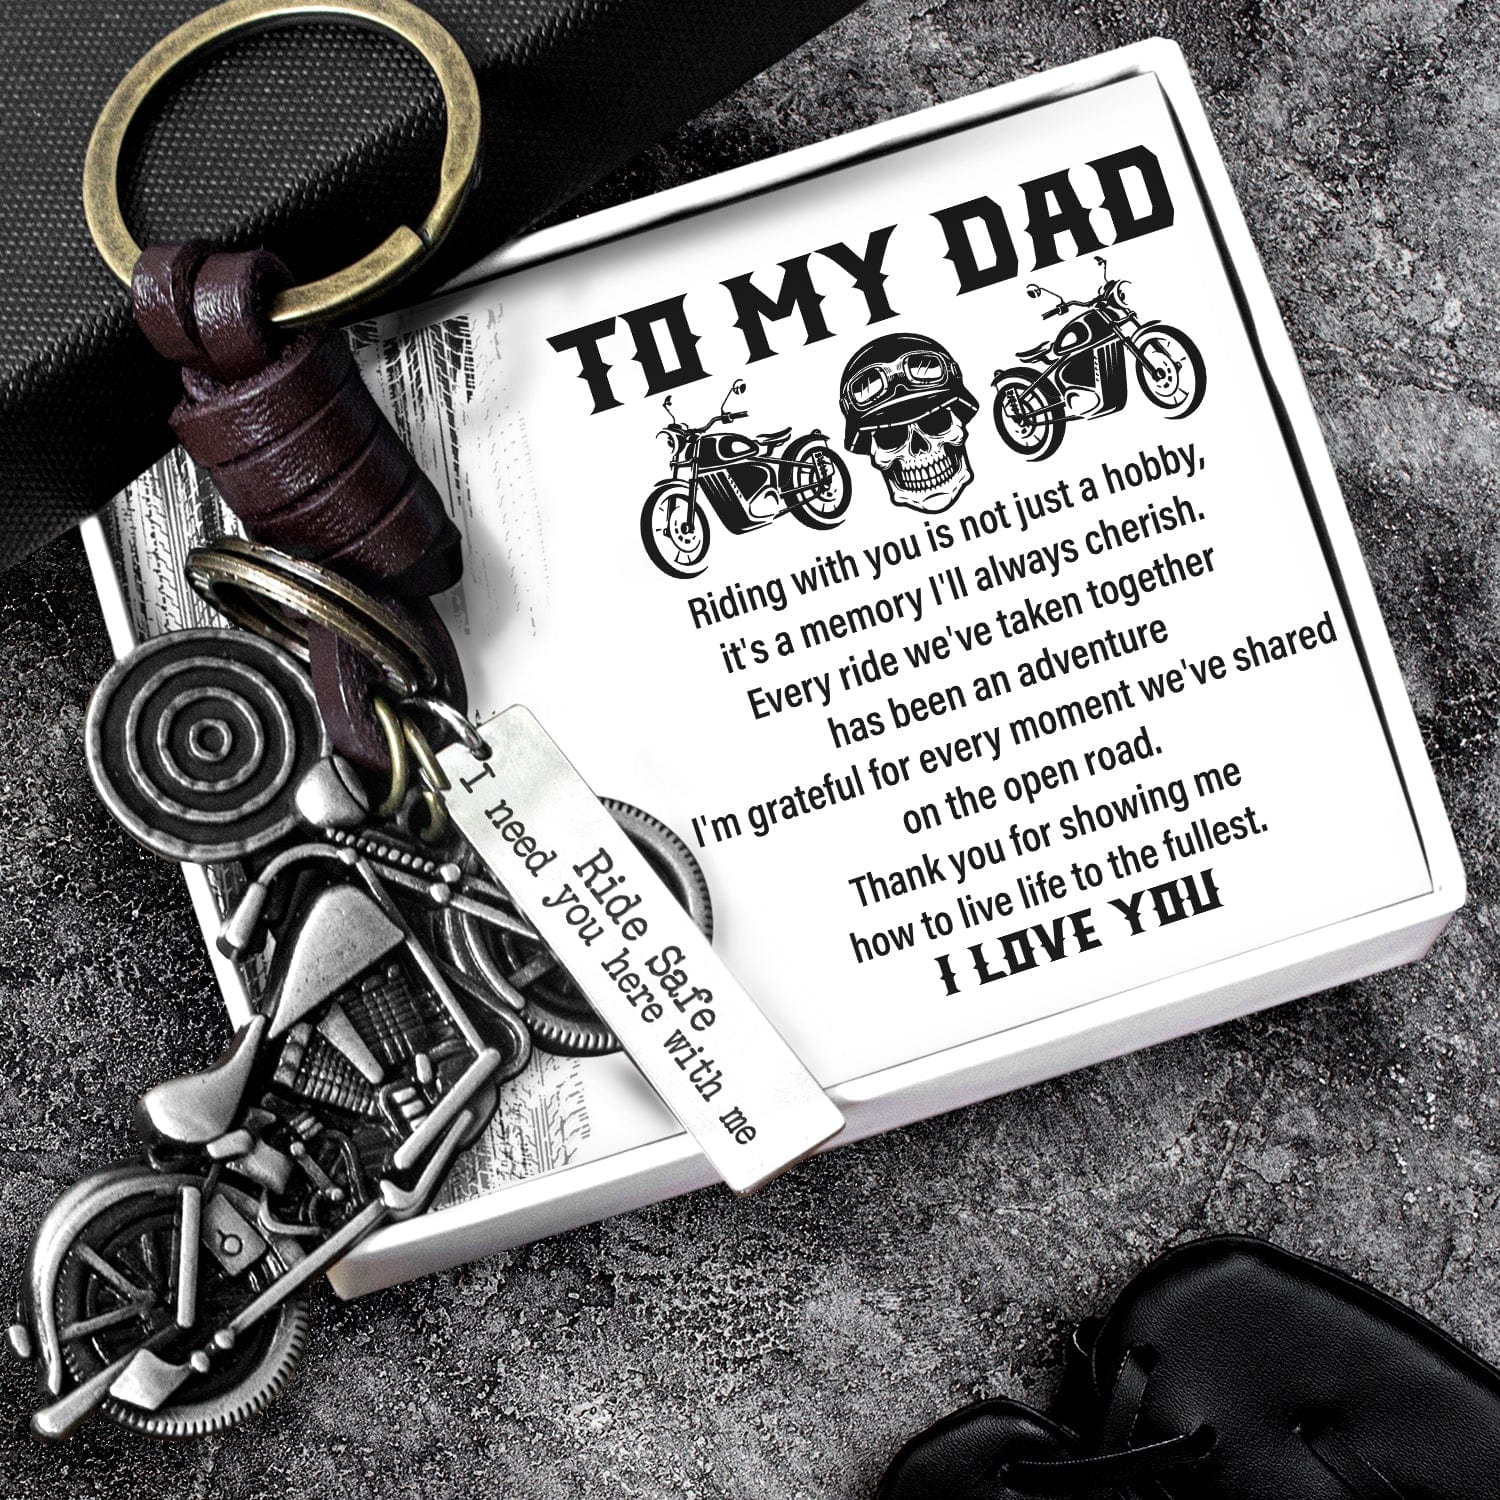 Motorcycle Keychain - Biker - To My Dad - I'm Grateful For Every Moment We've Shared On The Open Road - Gkx18012